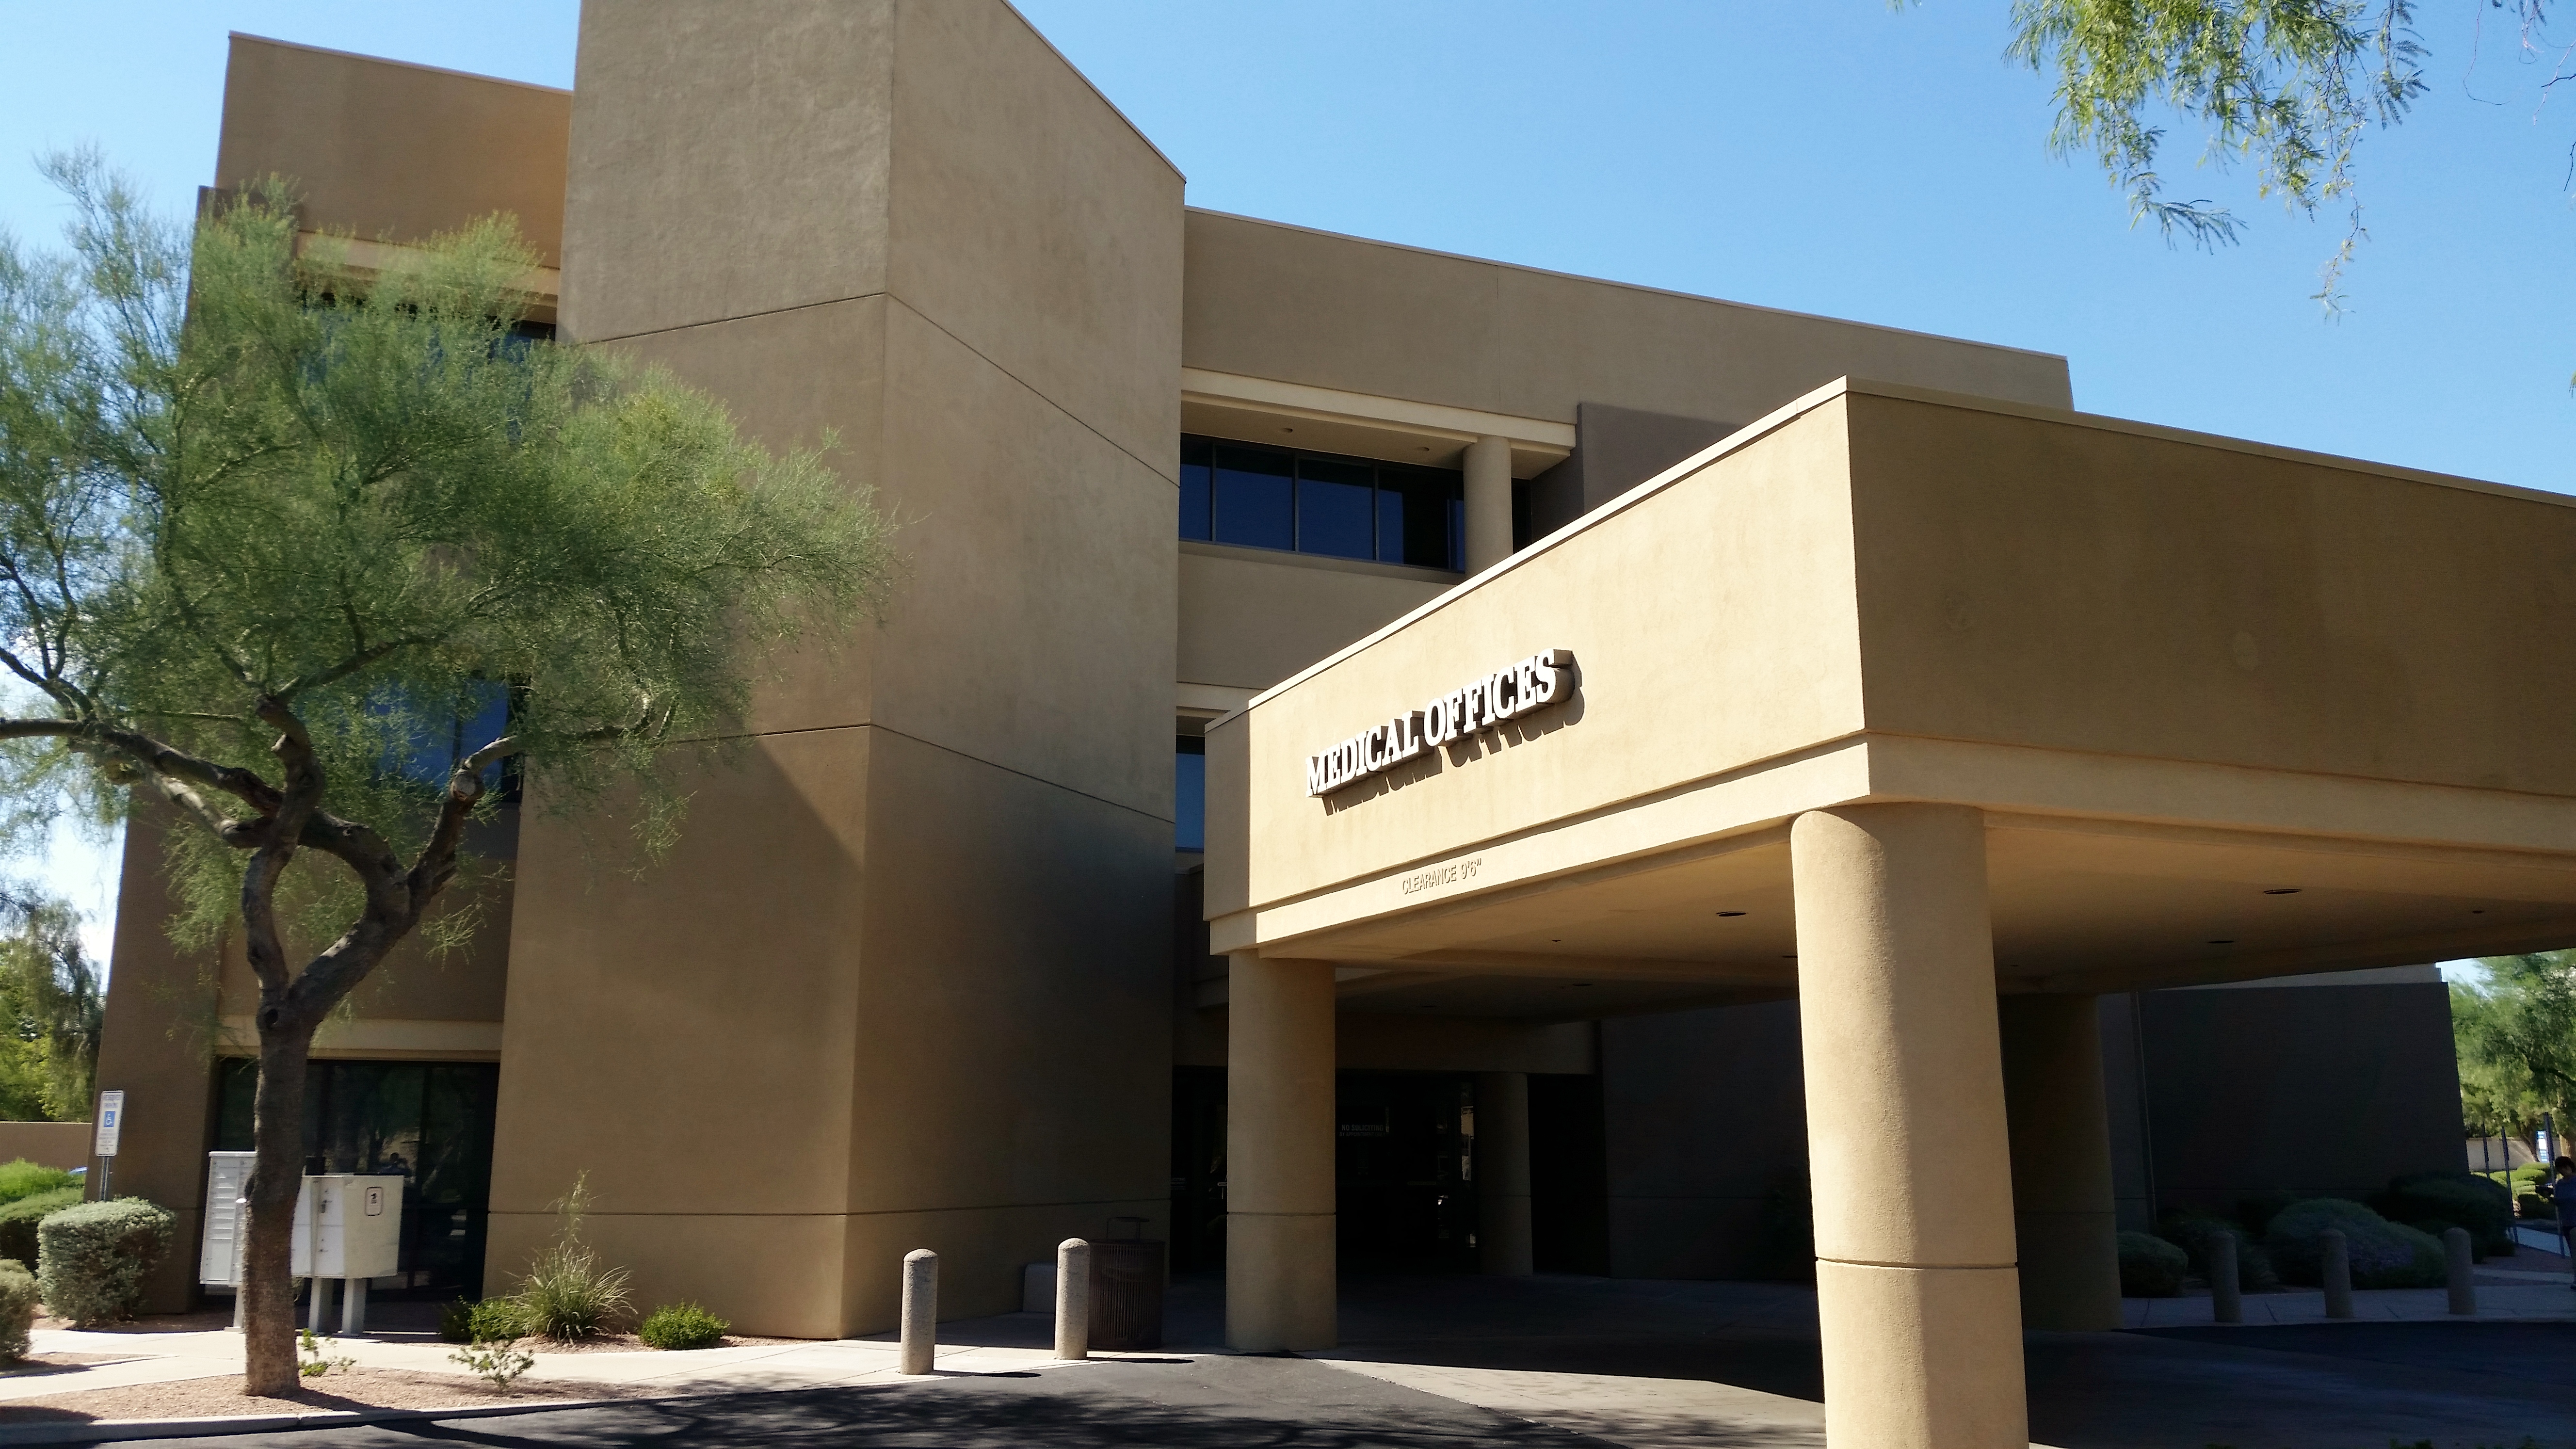 Ahwatukee Foothills Medical Center